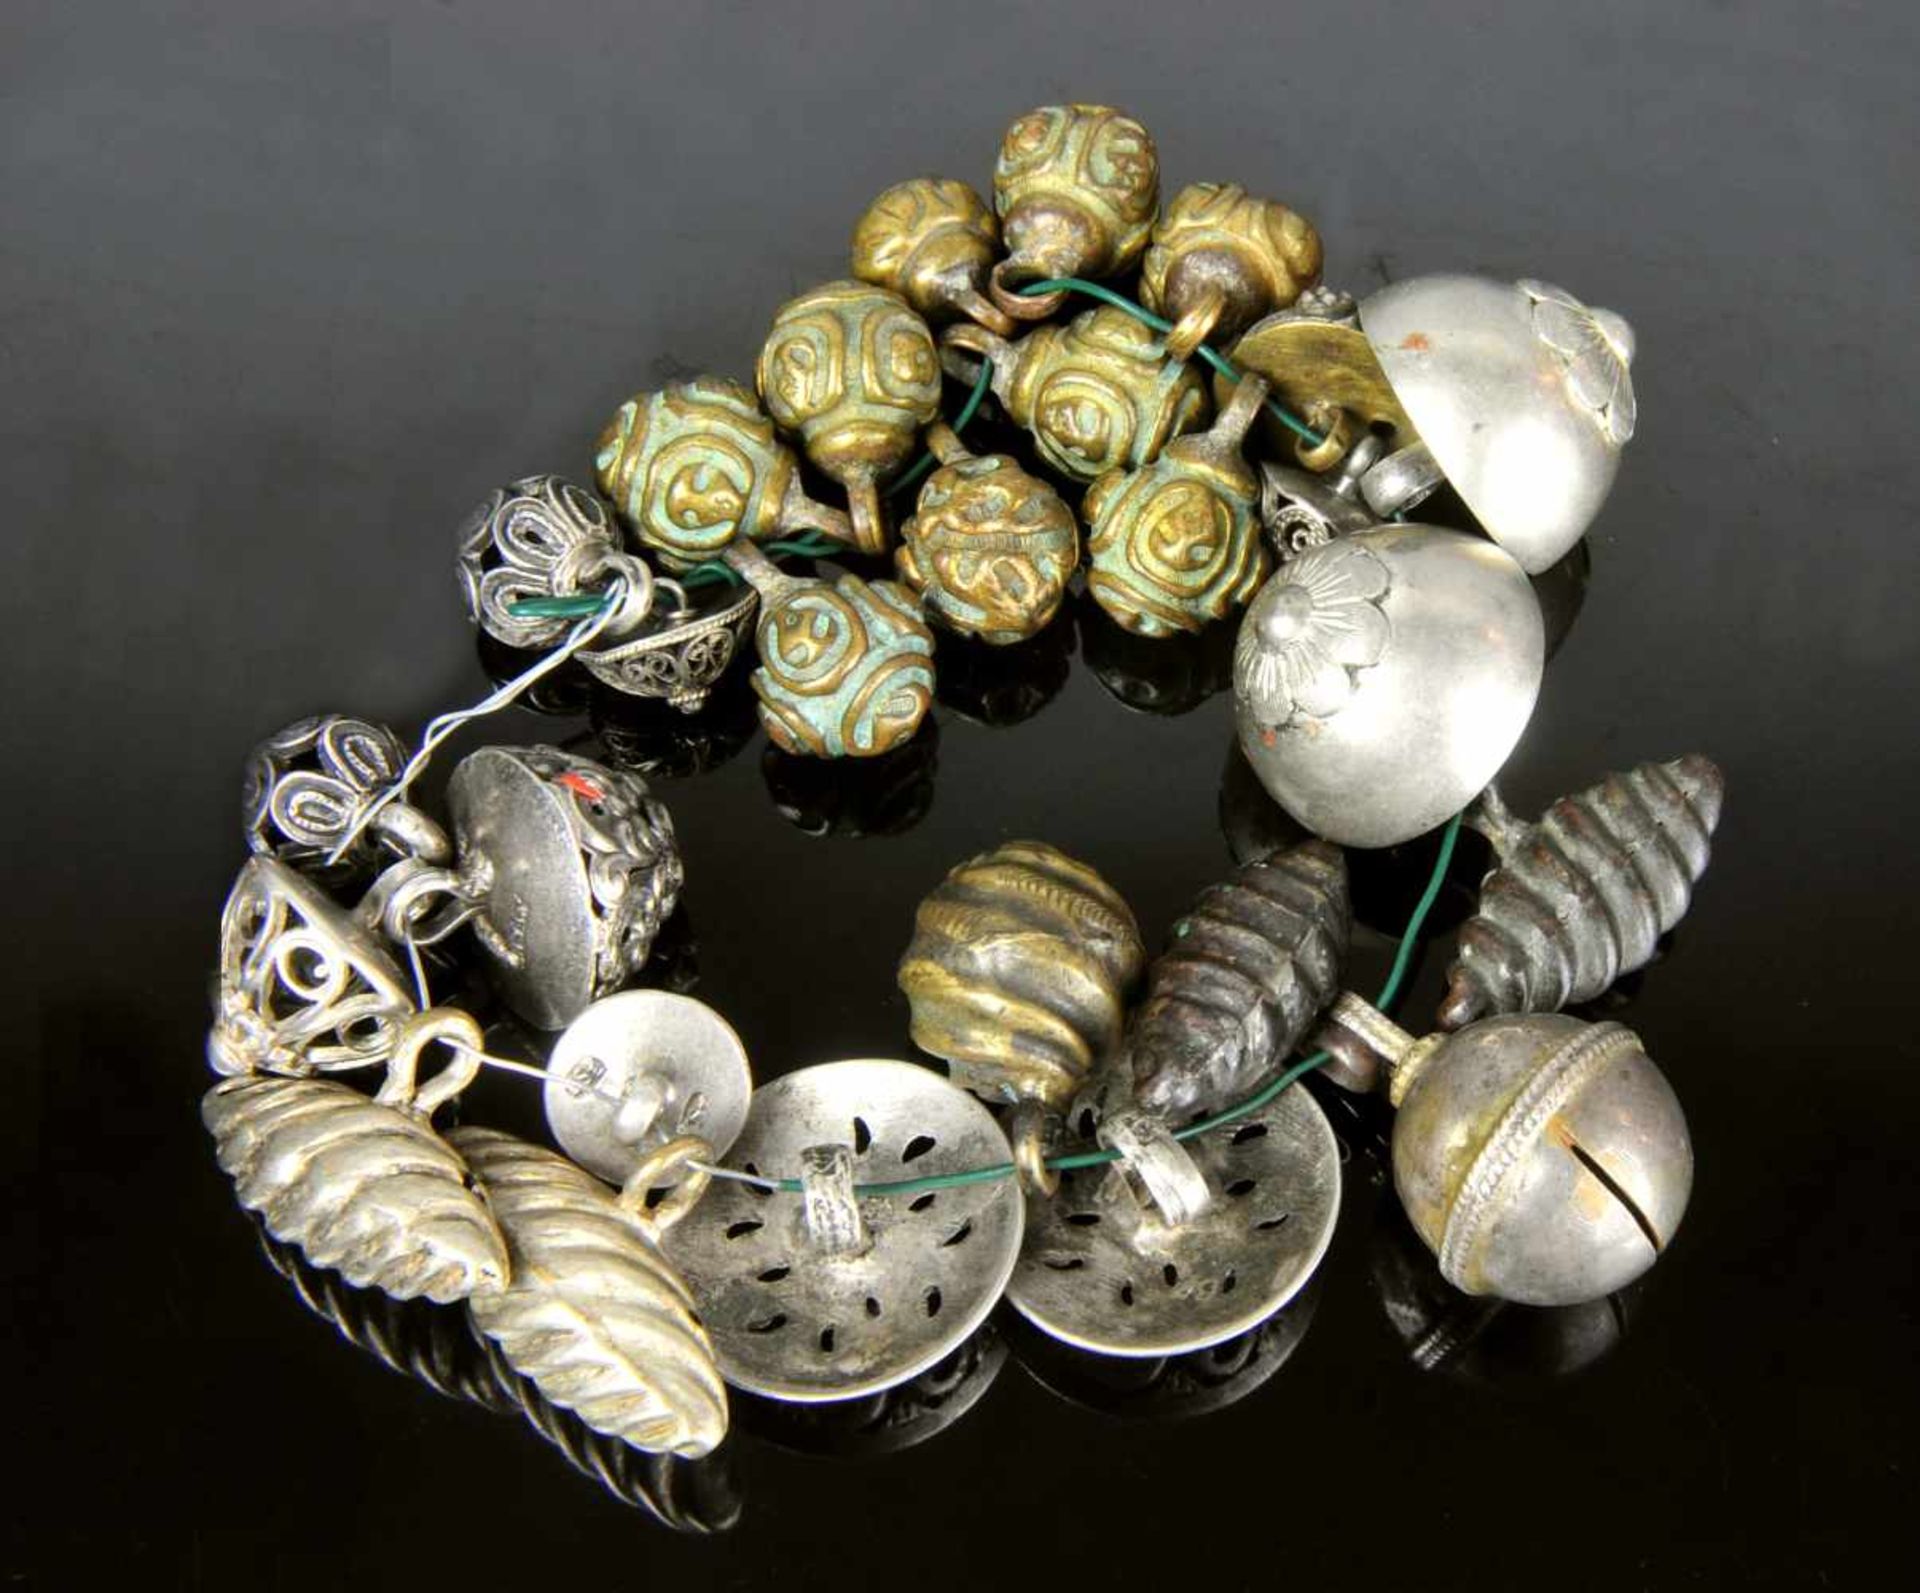 SMALL COLLECTION OF SILVER AND BRONZE BUTTONS. CENTRAL EUROPE (POLAND, HUNGARY?), 17/18TH C. GUZY - Bild 2 aus 2